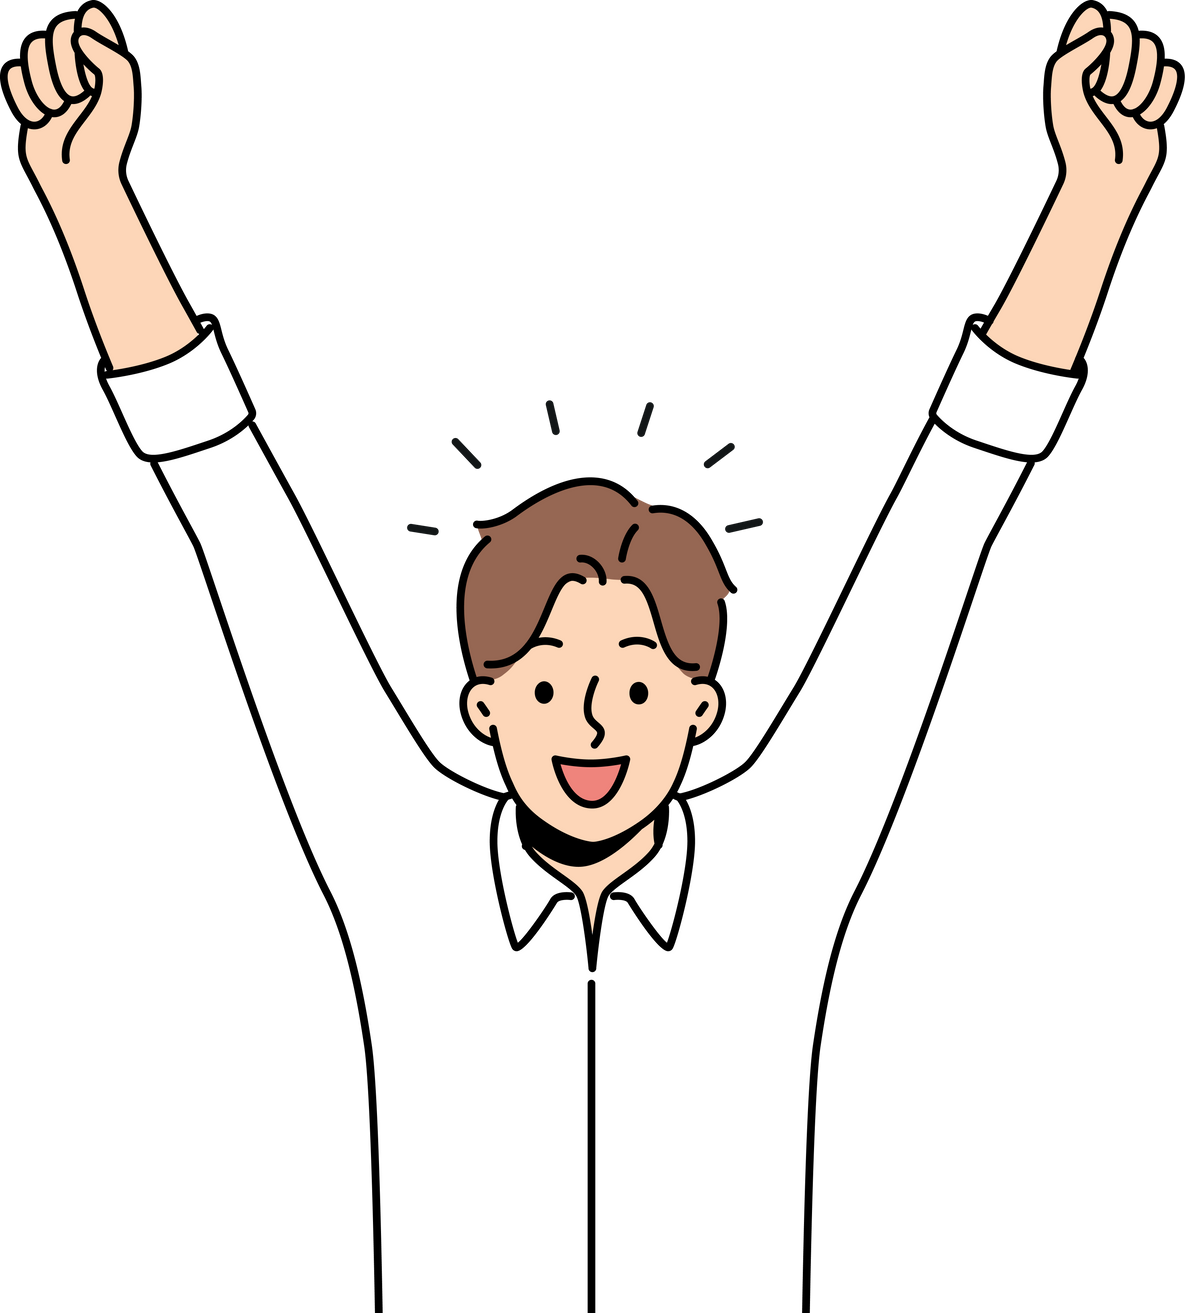 Delighted man celebrates victory by raising hands up and rejoicing in career achievements